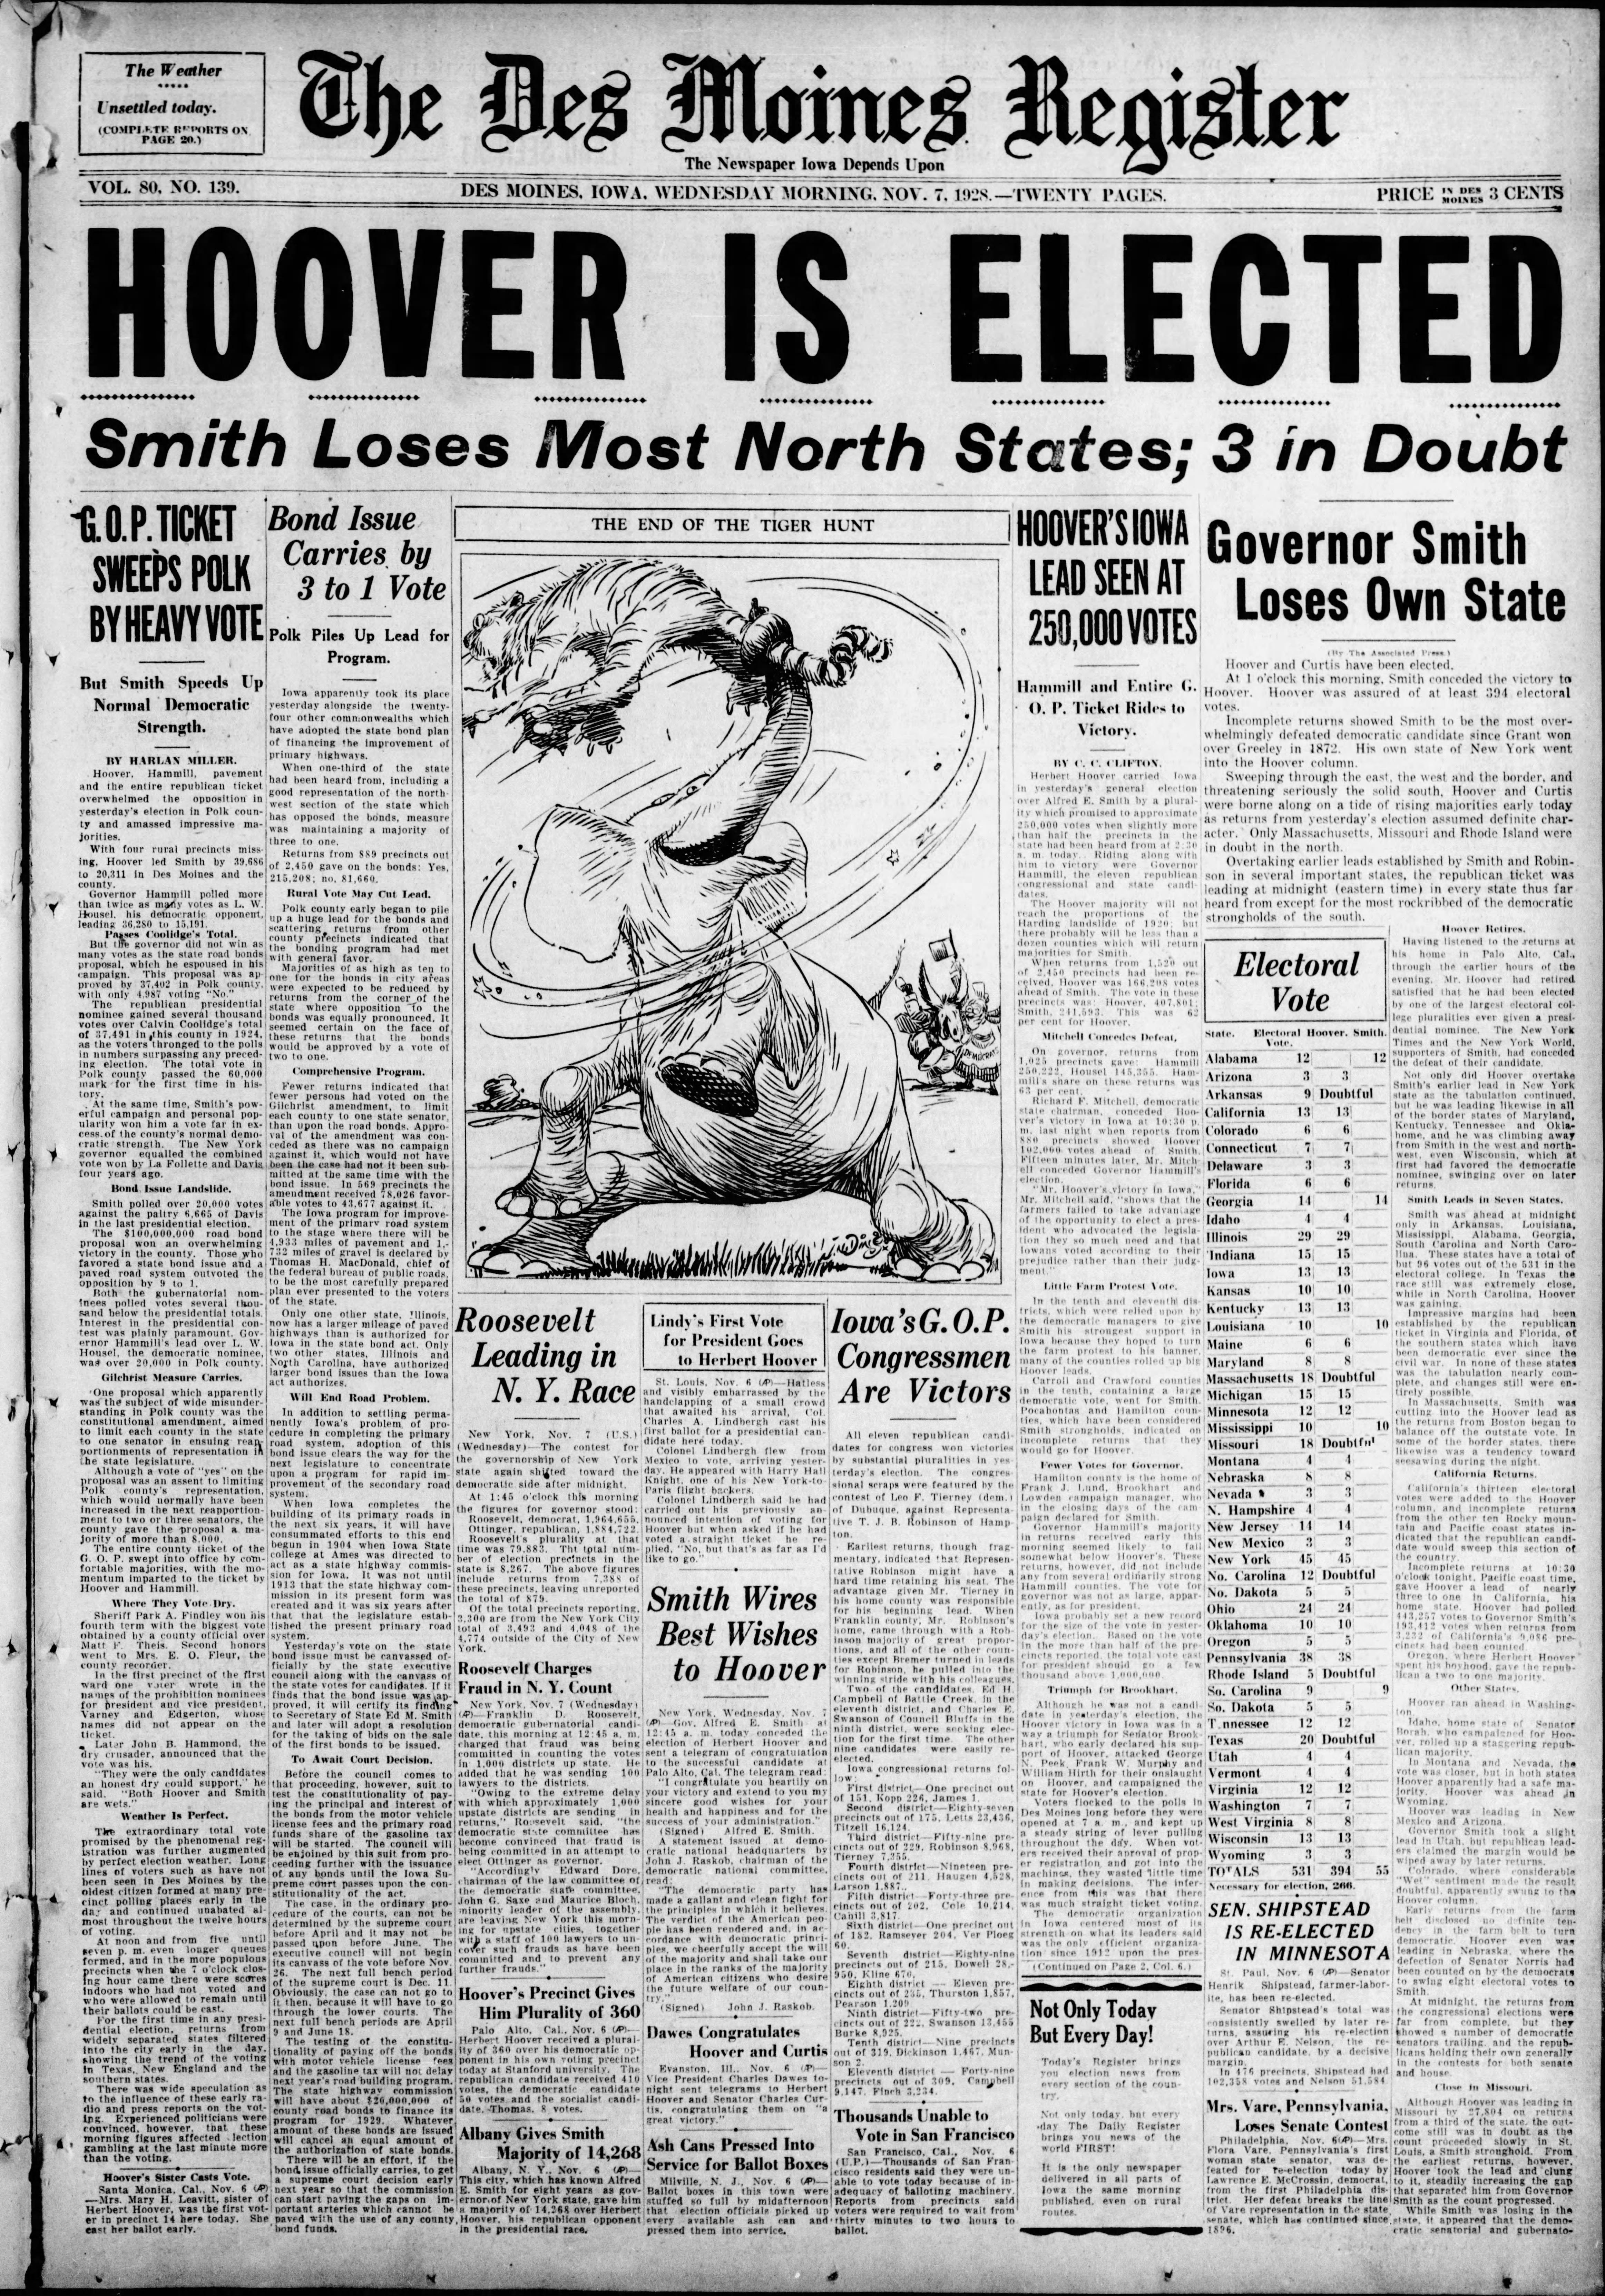 Historic front page from the Des Moines Register, Nov. 7, 1928: Hoover elected president